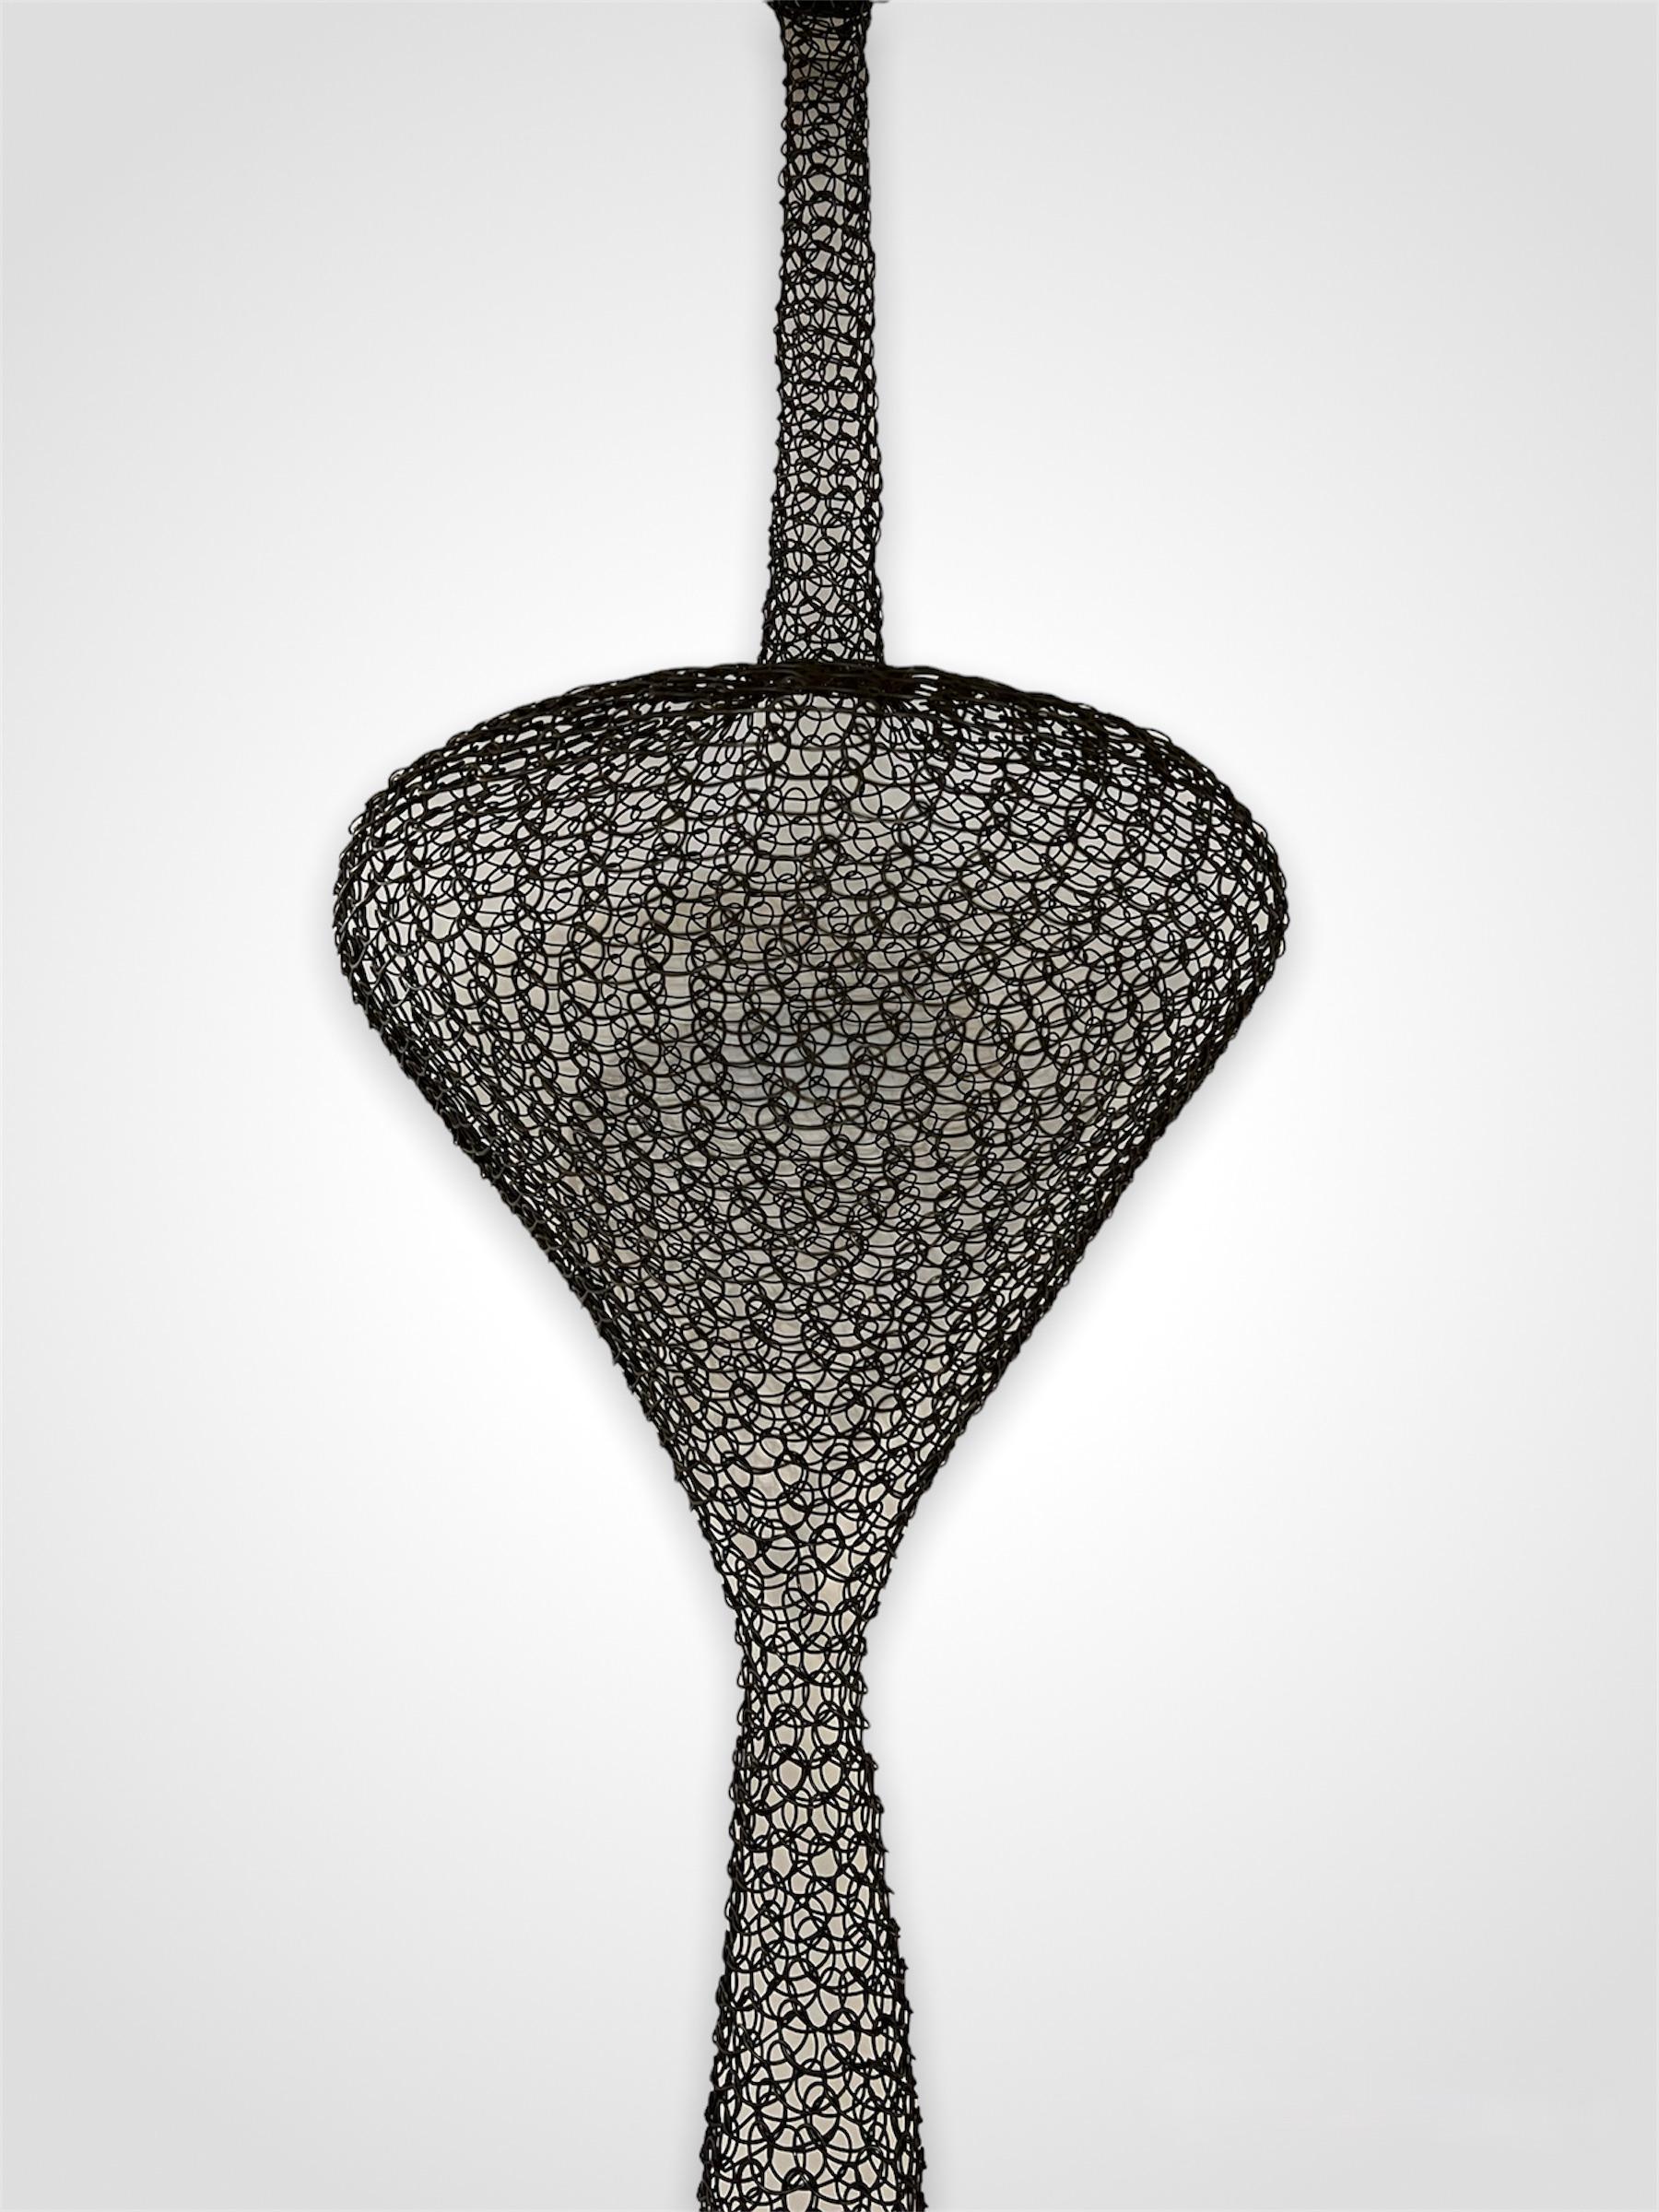 French Organic Woven Mesh Wire Sculpture by Ulrikk Dufosse For Sale